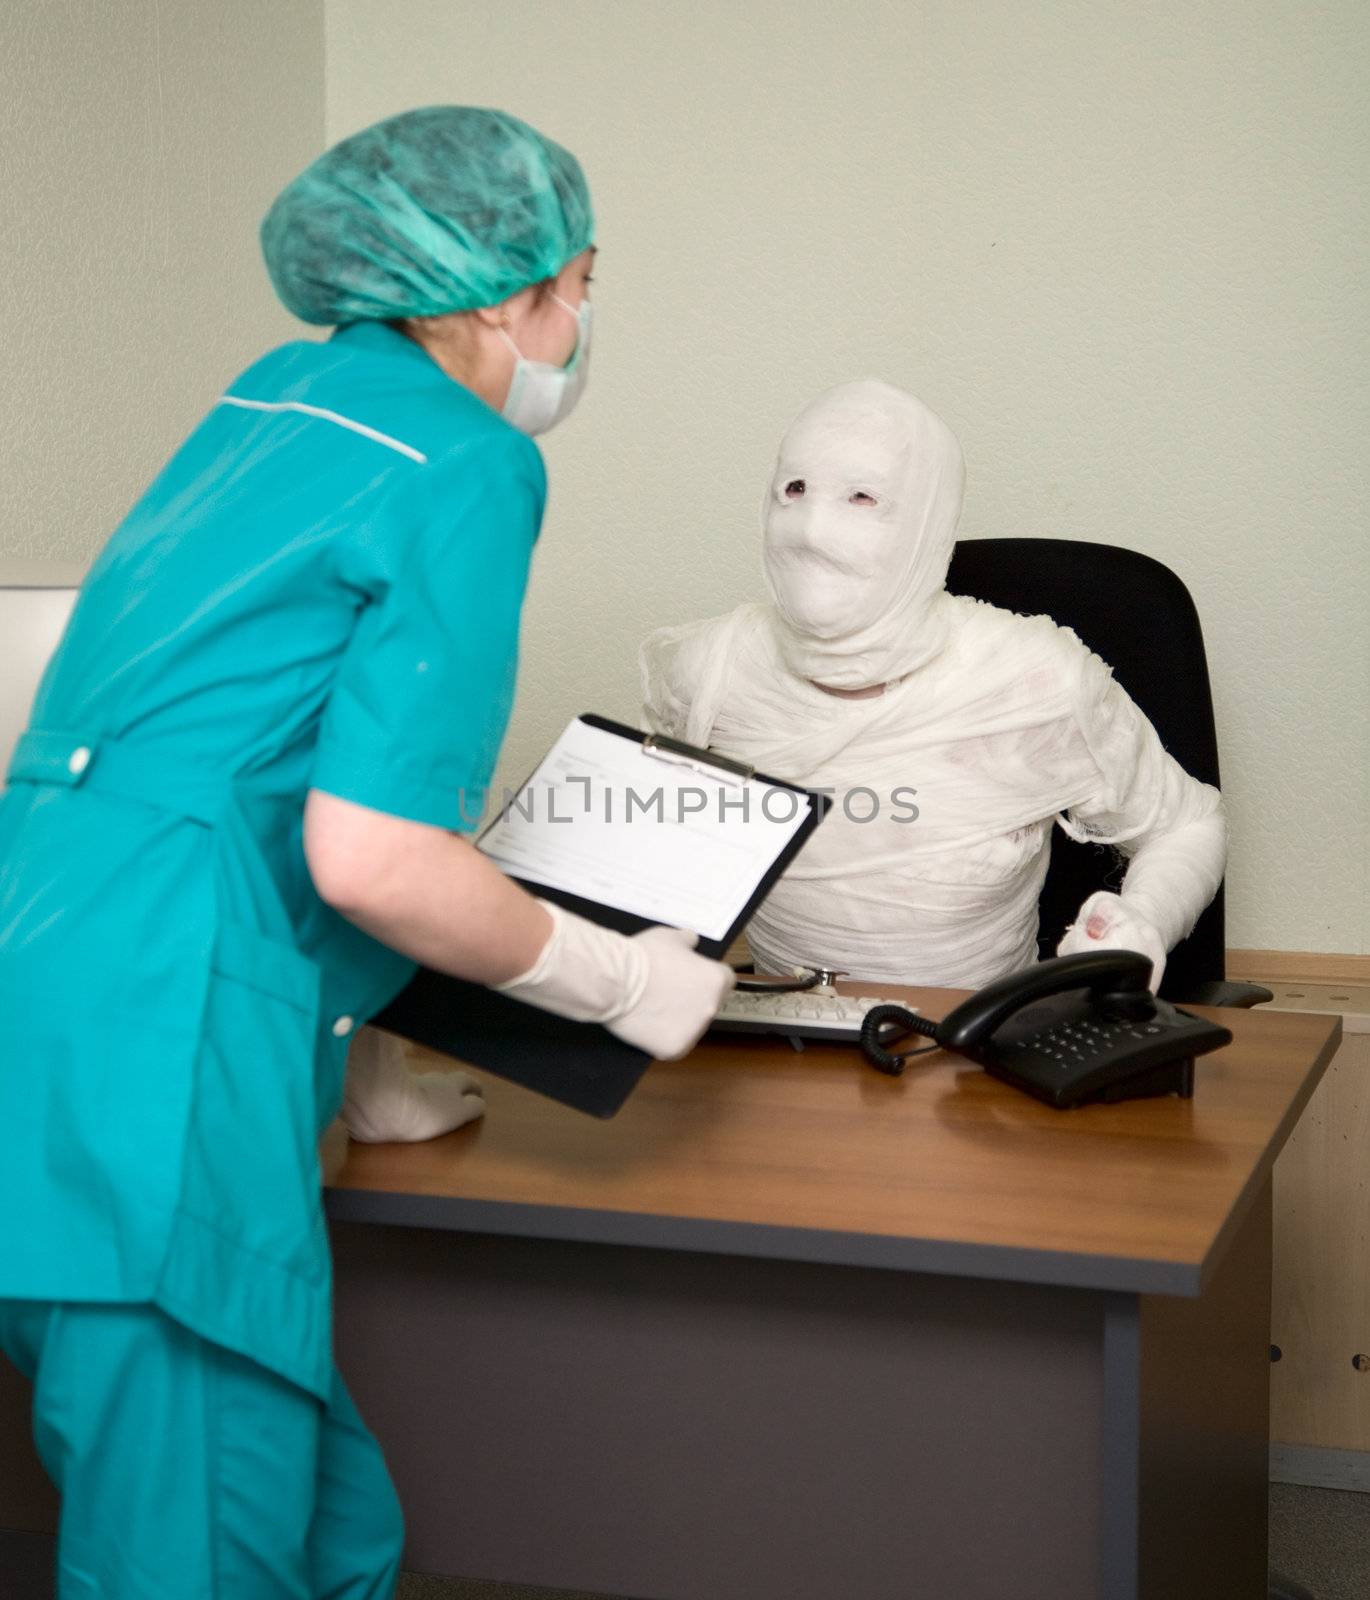 The patient similar to a mummy and the doctor, at office